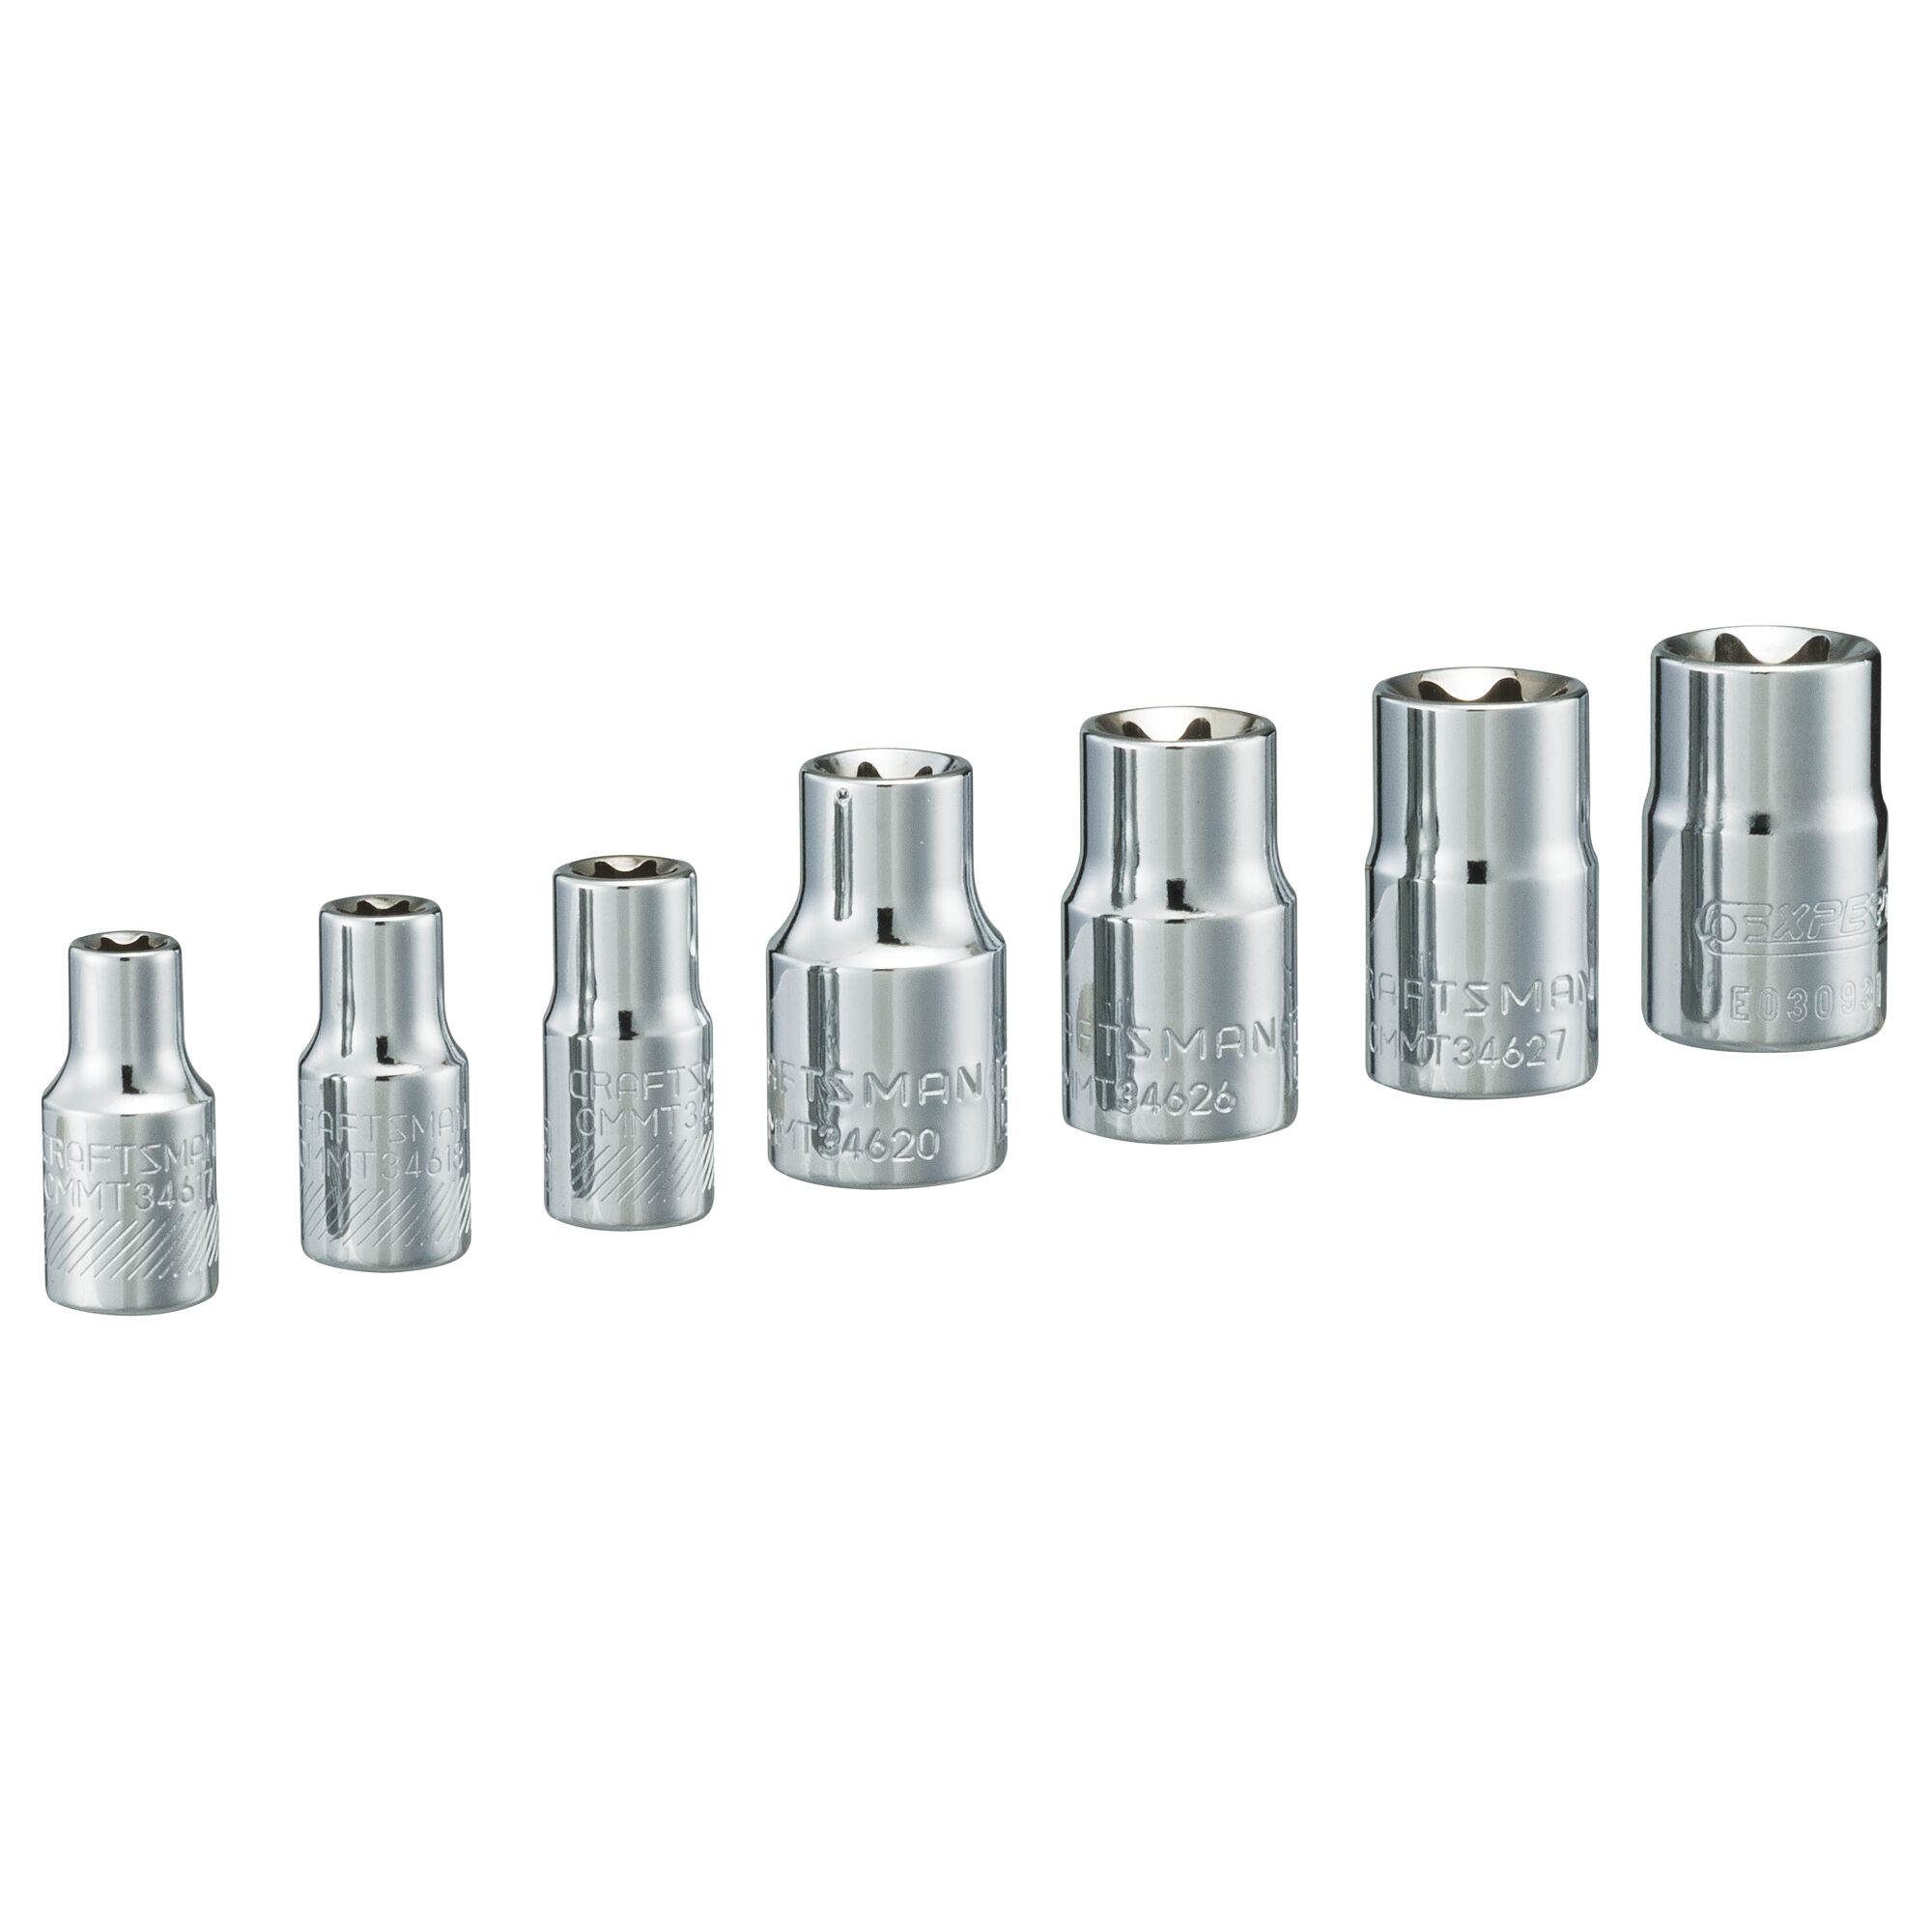 View of CRAFTSMAN Sockets on white background